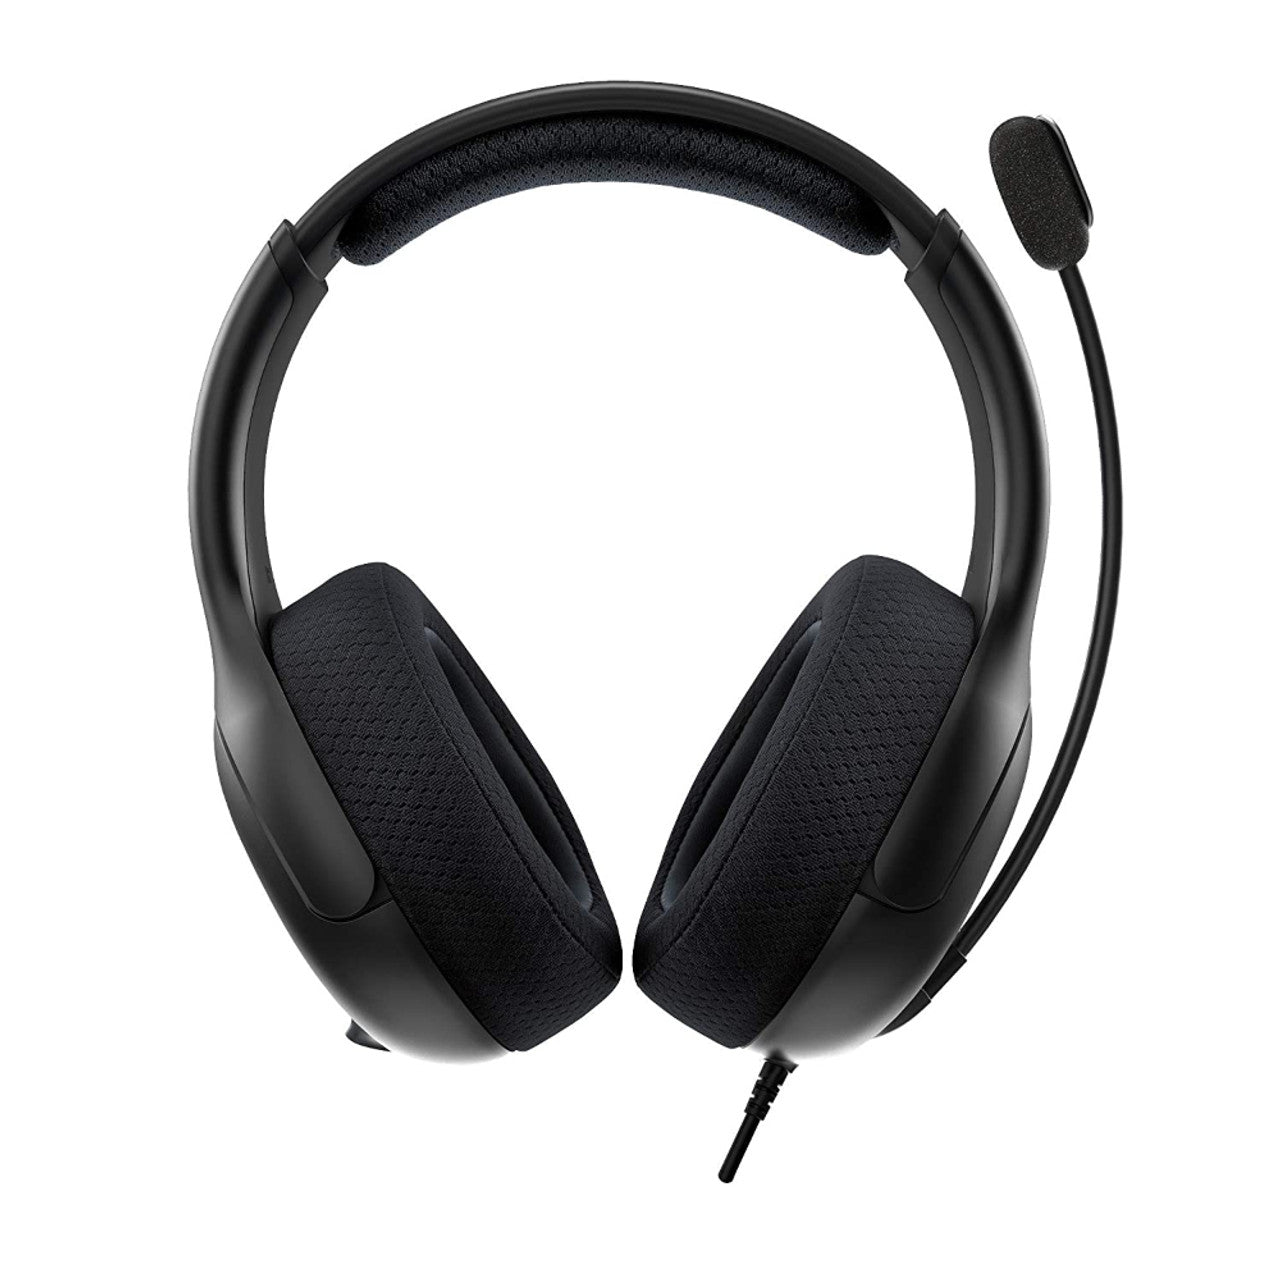 PS4 / PS5 Wired Stereo Headset LVL50 Black PDP